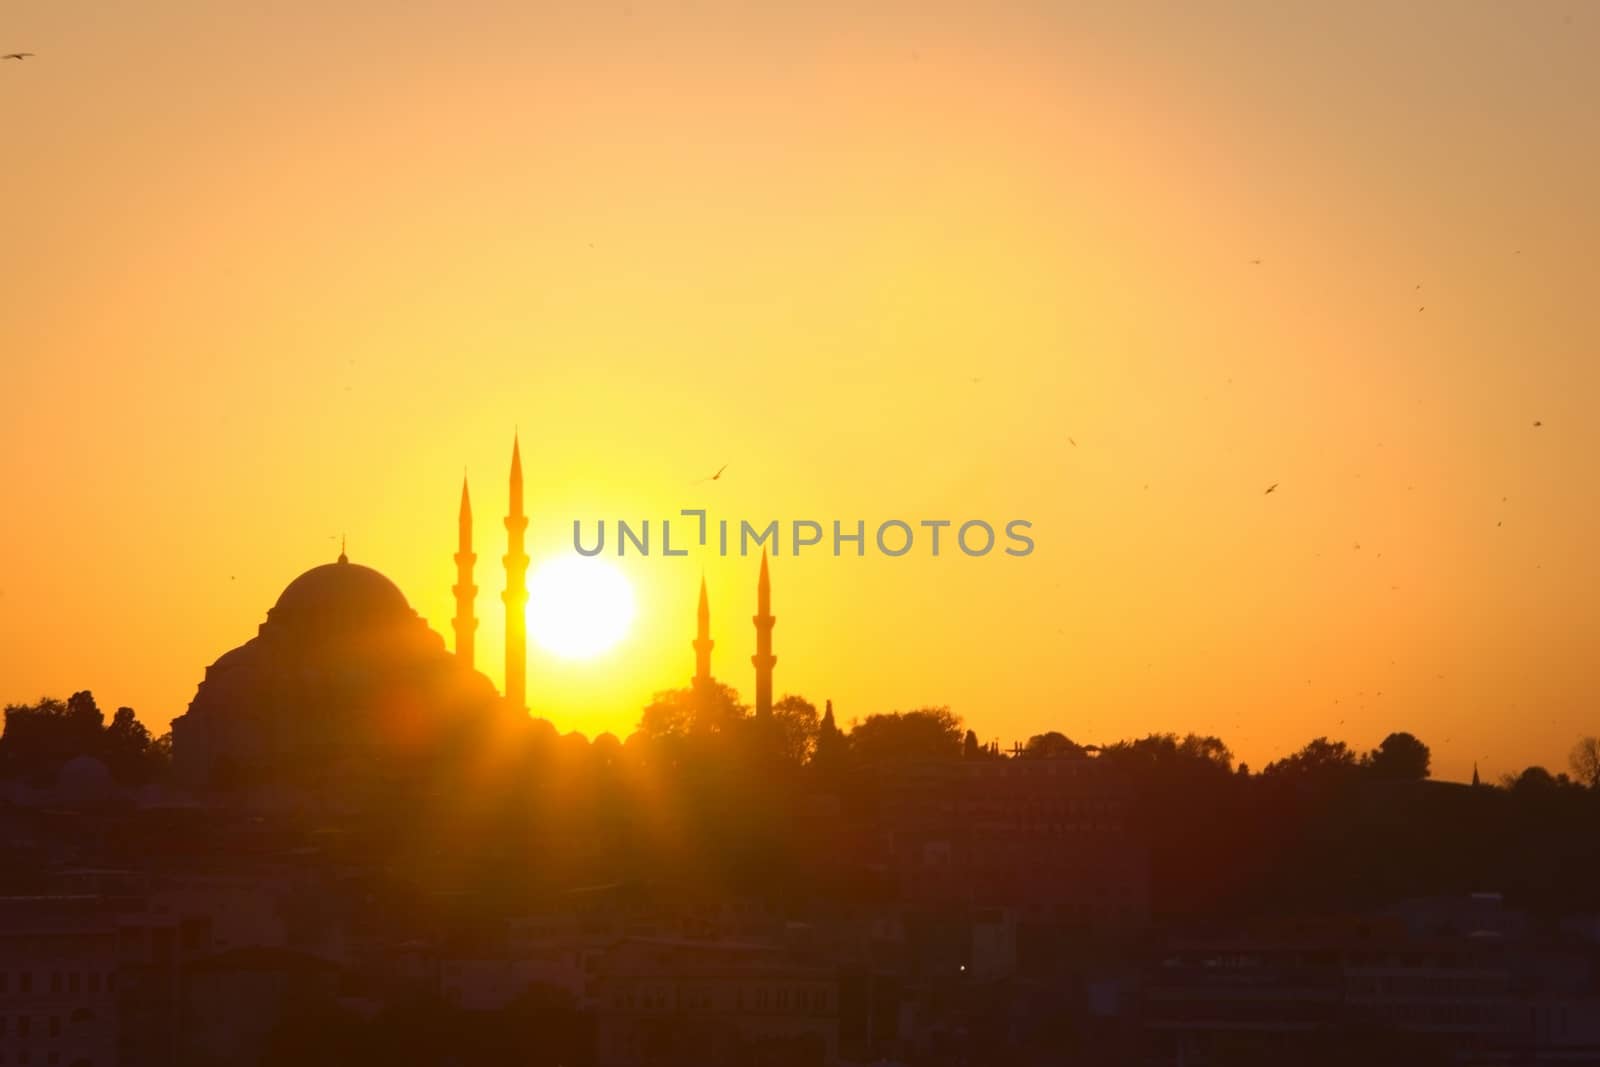 Hagia Sophia, the most important tourist attraction of Istanbul, Turkey, silhouetted against the bright sunset sky. by hernan_hyper